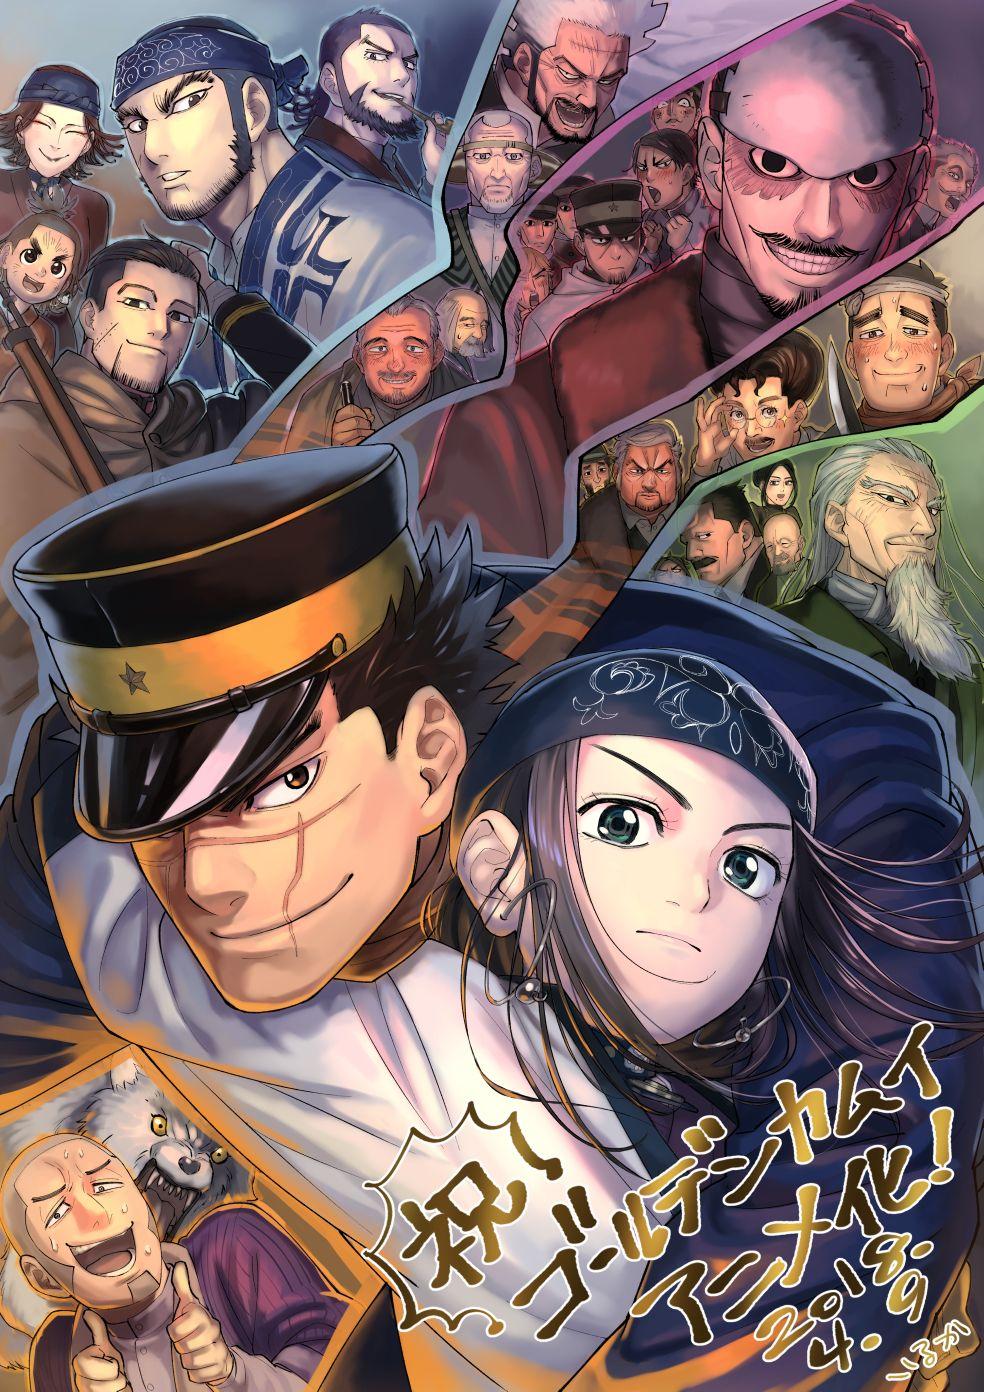 Golden Kamuy, by Pixiv Id 1823342. Golden Kamuy